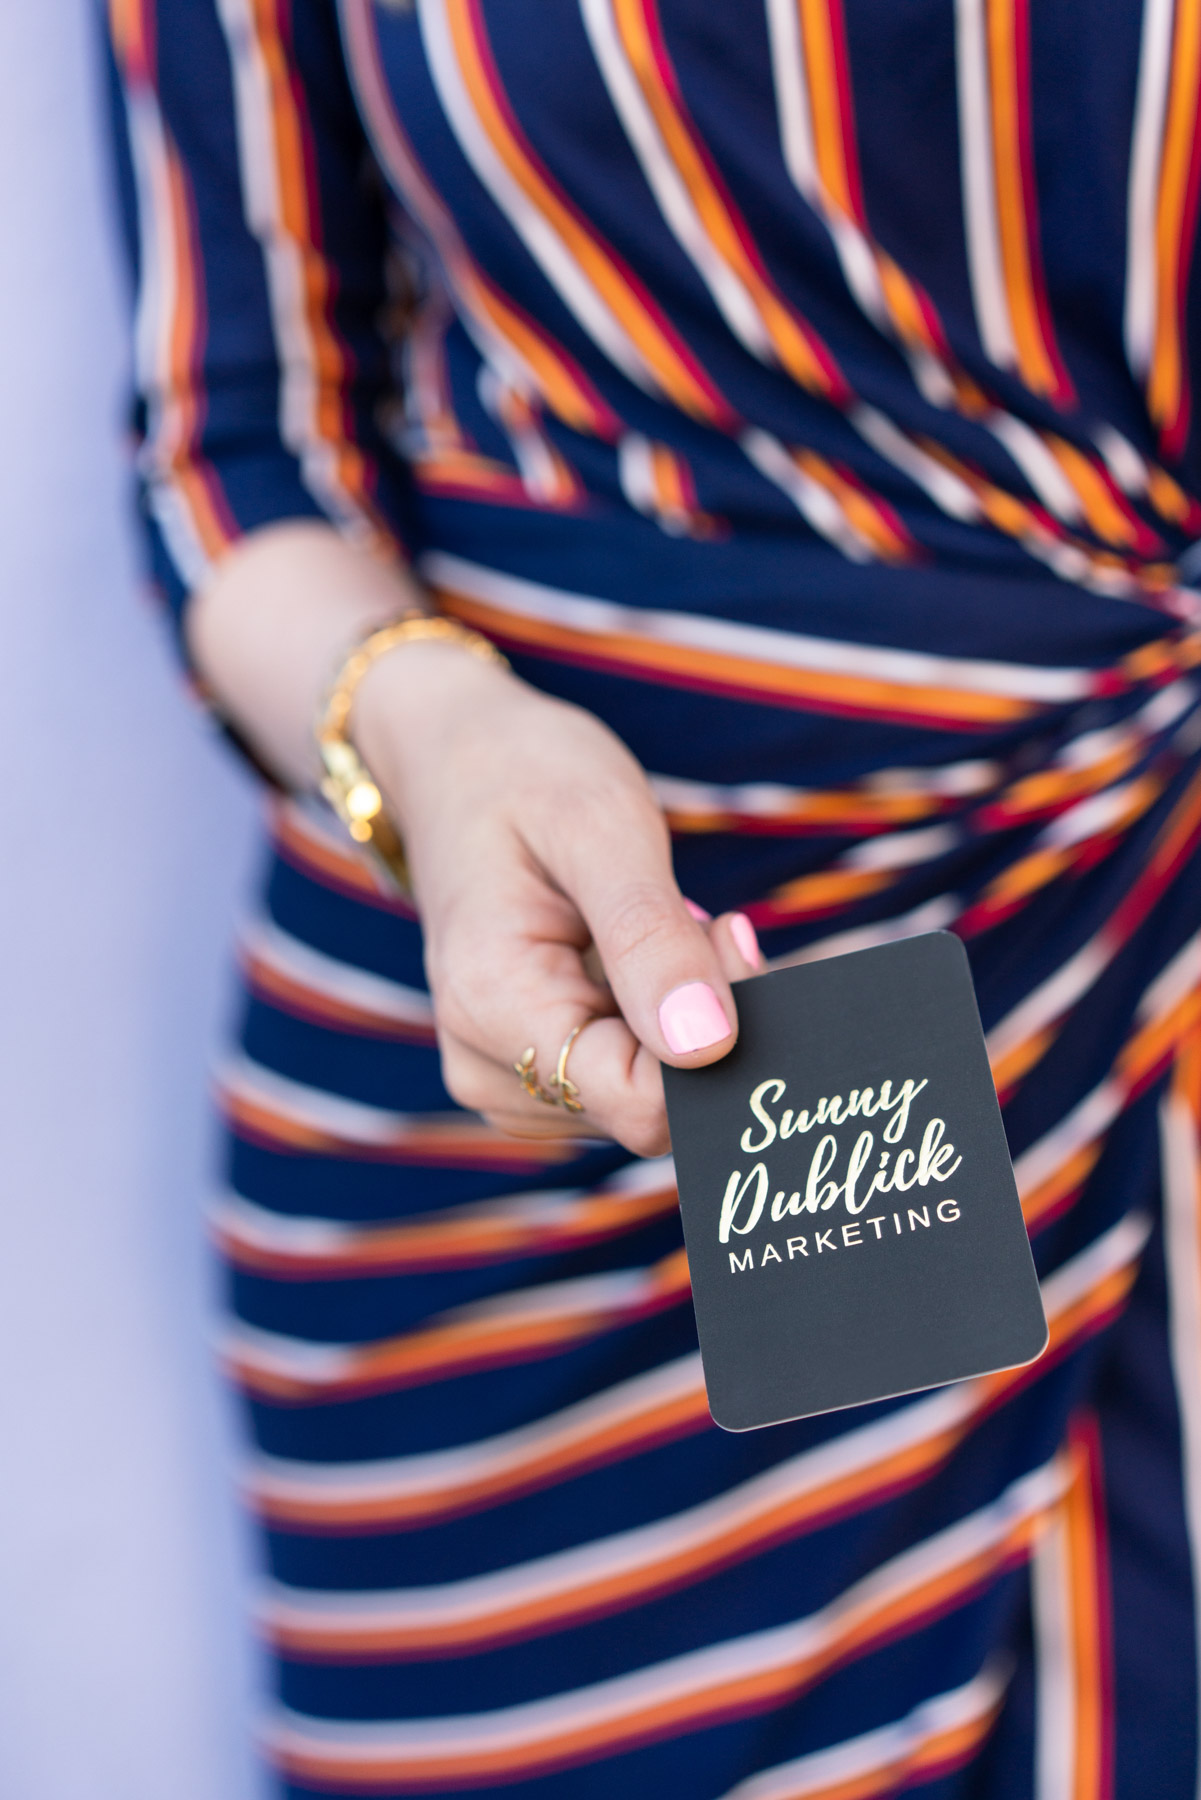 Small business brand photo of a woman holding out a business card for her marketing business